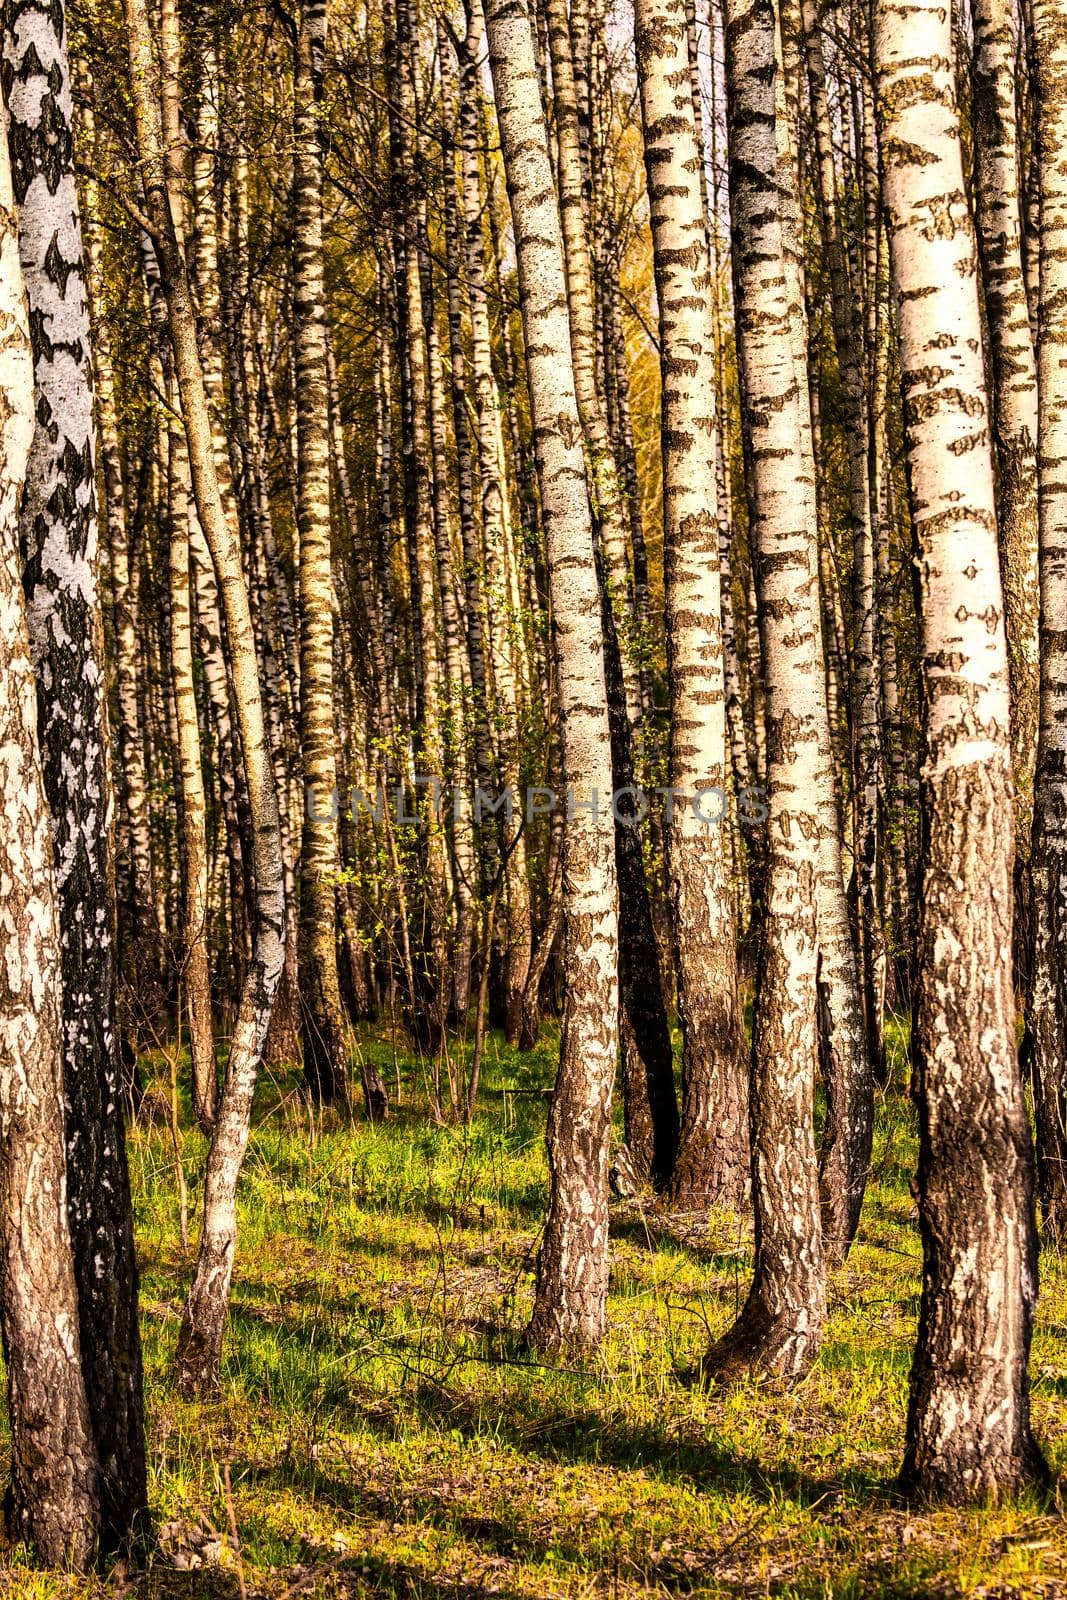 Rows of birch trunks with young foliage, illuminated by the sun at dusk or dawn in spring.